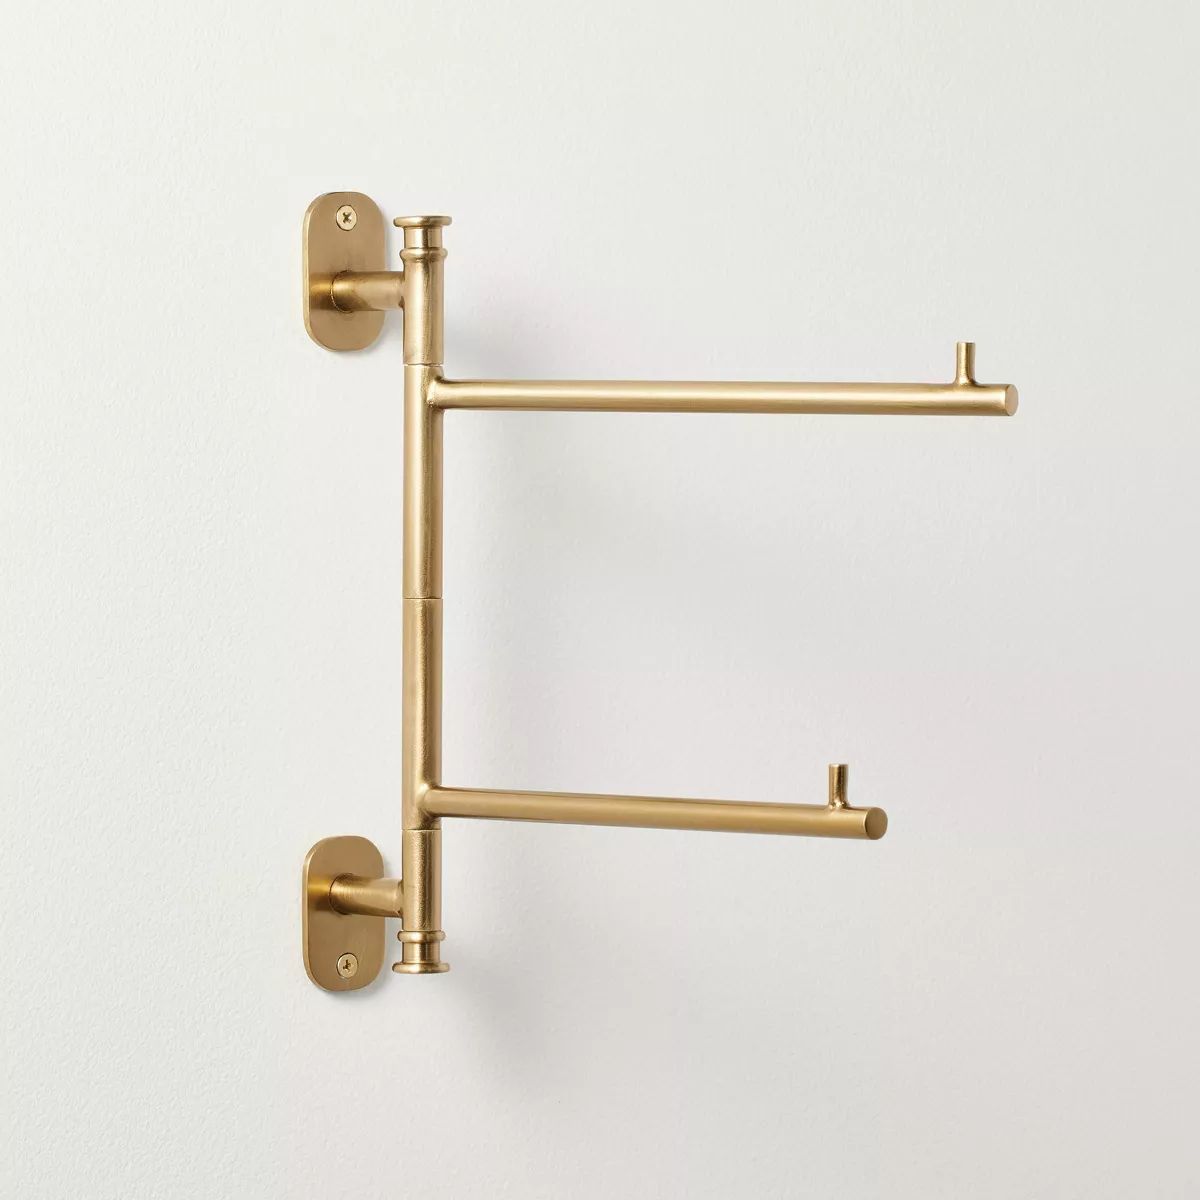 Wall-Mounted Brass Swivel Hand Towel Rack Antique Finish - Hearth & Hand™ with Magnolia | Target